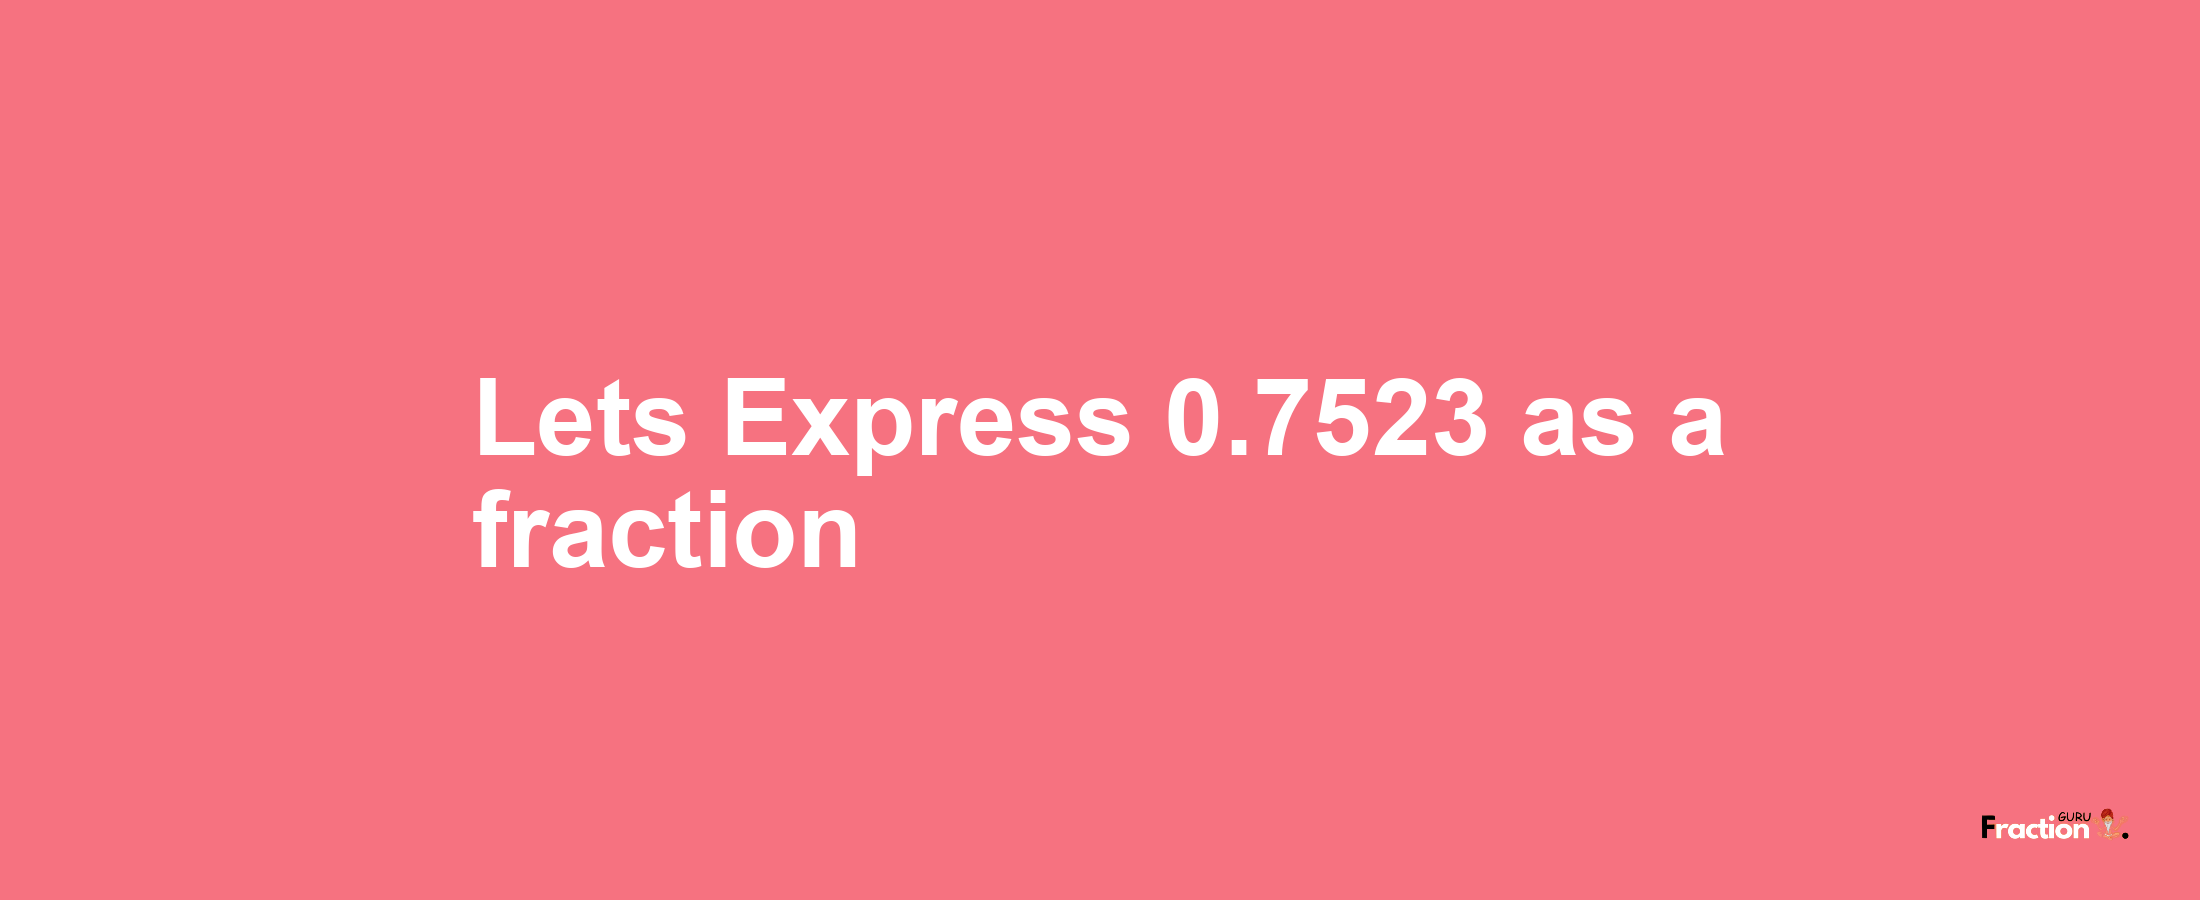 Lets Express 0.7523 as afraction